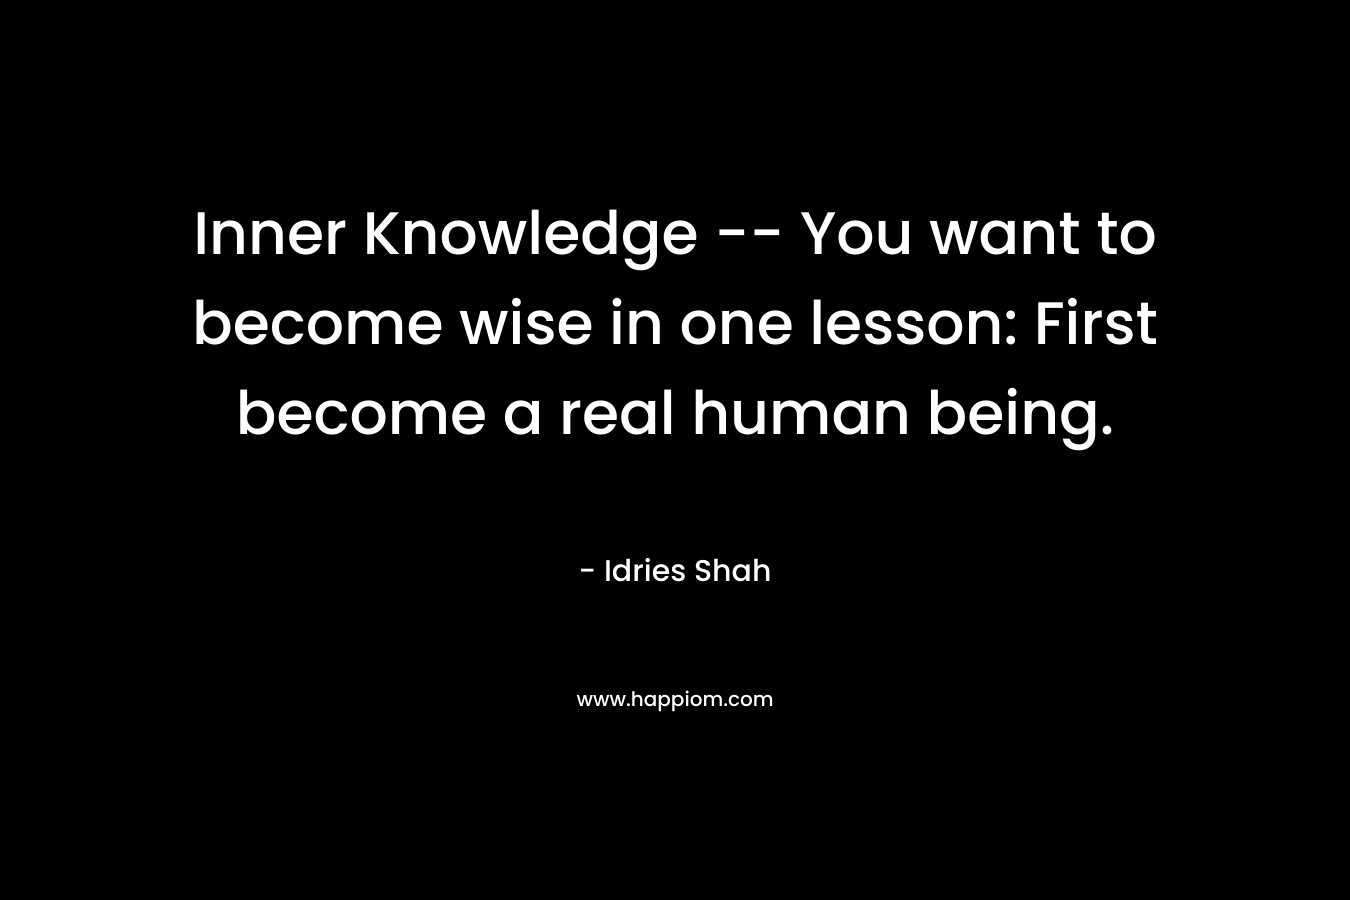 Inner Knowledge -- You want to become wise in one lesson: First become a real human being.